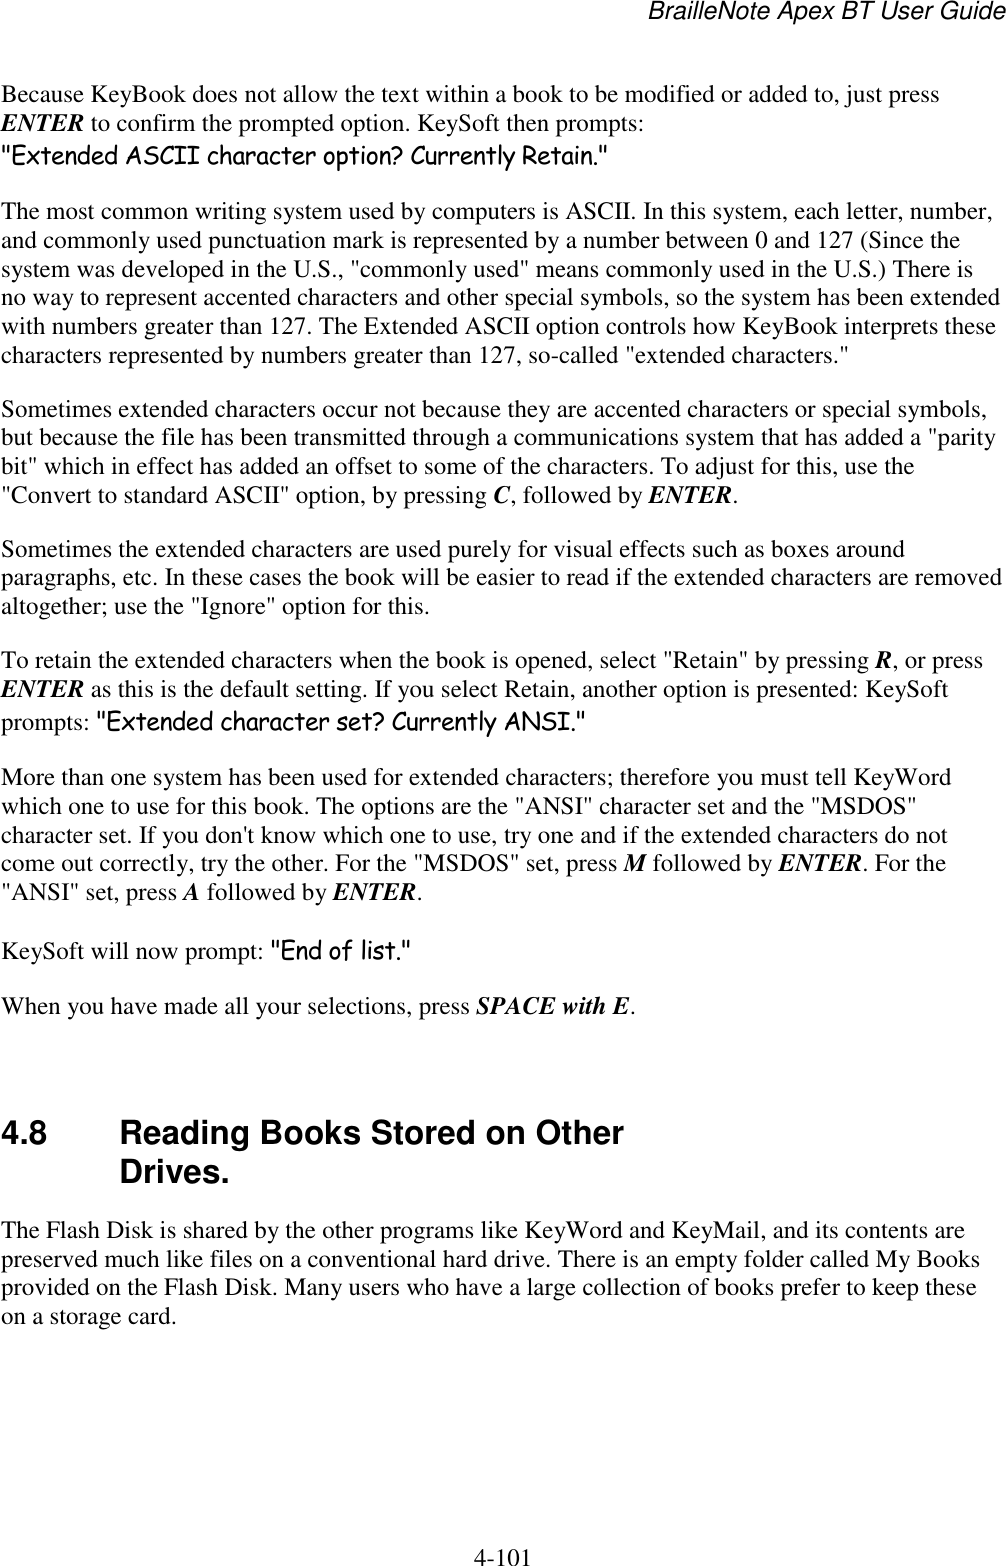 BrailleNote Apex BT User Guide   4-101   Because KeyBook does not allow the text within a book to be modified or added to, just press ENTER to confirm the prompted option. KeySoft then prompts: &quot;Extended ASCII character option? Currently Retain.&quot; The most common writing system used by computers is ASCII. In this system, each letter, number, and commonly used punctuation mark is represented by a number between 0 and 127 (Since the system was developed in the U.S., &quot;commonly used&quot; means commonly used in the U.S.) There is no way to represent accented characters and other special symbols, so the system has been extended with numbers greater than 127. The Extended ASCII option controls how KeyBook interprets these characters represented by numbers greater than 127, so-called &quot;extended characters.&quot; Sometimes extended characters occur not because they are accented characters or special symbols, but because the file has been transmitted through a communications system that has added a &quot;parity bit&quot; which in effect has added an offset to some of the characters. To adjust for this, use the &quot;Convert to standard ASCII&quot; option, by pressing C, followed by ENTER. Sometimes the extended characters are used purely for visual effects such as boxes around paragraphs, etc. In these cases the book will be easier to read if the extended characters are removed altogether; use the &quot;Ignore&quot; option for this. To retain the extended characters when the book is opened, select &quot;Retain&quot; by pressing R, or press ENTER as this is the default setting. If you select Retain, another option is presented: KeySoft prompts: &quot;Extended character set? Currently ANSI.&quot; More than one system has been used for extended characters; therefore you must tell KeyWord which one to use for this book. The options are the &quot;ANSI&quot; character set and the &quot;MSDOS&quot; character set. If you don&apos;t know which one to use, try one and if the extended characters do not come out correctly, try the other. For the &quot;MSDOS&quot; set, press M followed by ENTER. For the &quot;ANSI&quot; set, press A followed by ENTER. KeySoft will now prompt: &quot;End of list.&quot; When you have made all your selections, press SPACE with E.   4.8  Reading Books Stored on Other Drives. The Flash Disk is shared by the other programs like KeyWord and KeyMail, and its contents are preserved much like files on a conventional hard drive. There is an empty folder called My Books provided on the Flash Disk. Many users who have a large collection of books prefer to keep these on a storage card.   